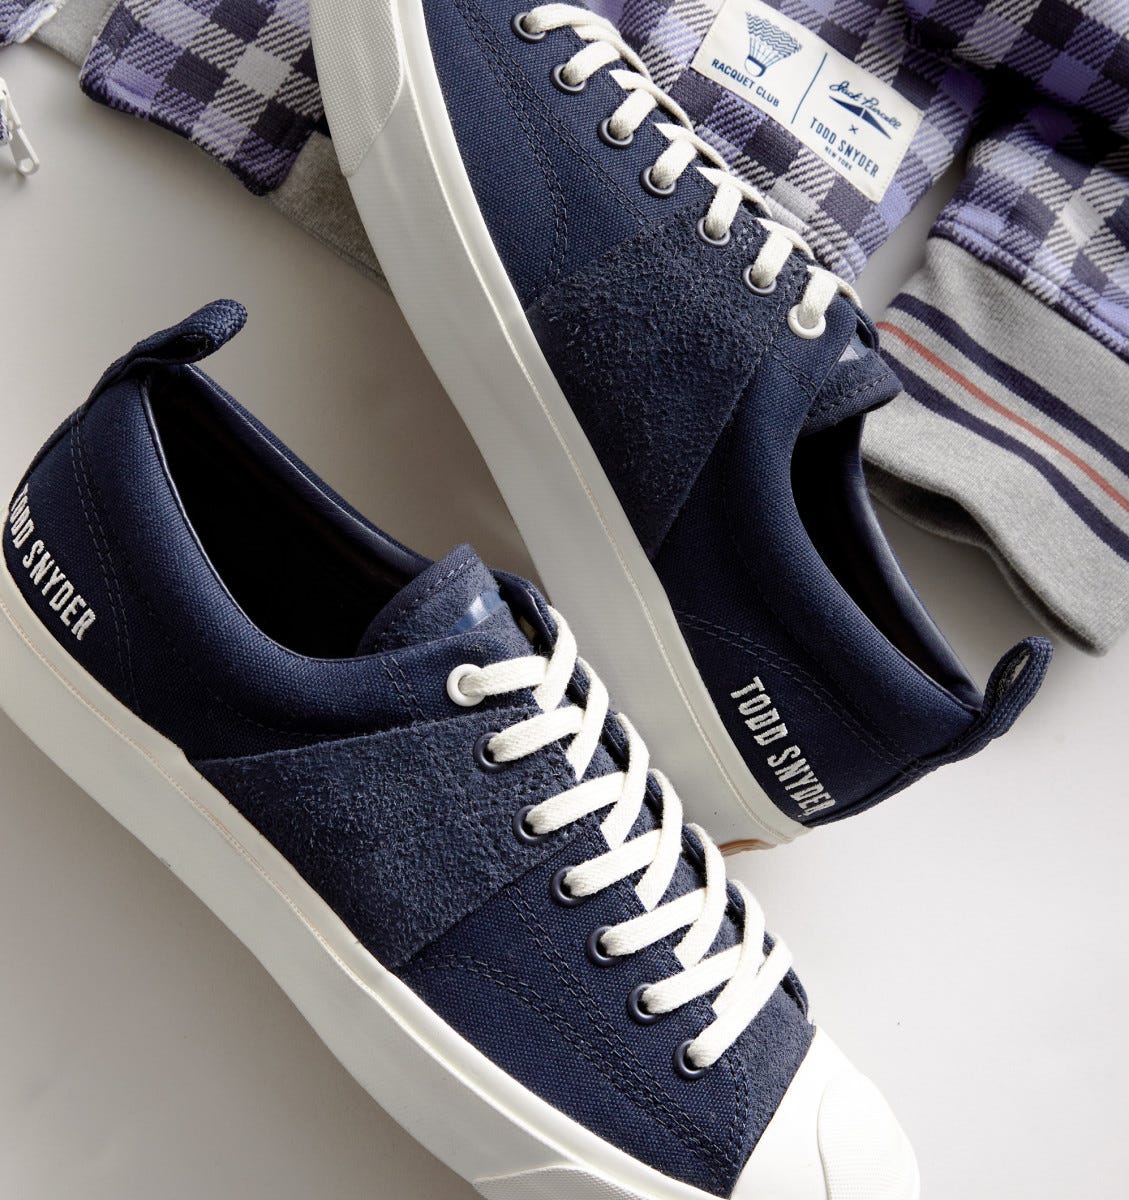 Converse & Todd Snyder Team For Jack Purcell Sneaker Collab - Maxim